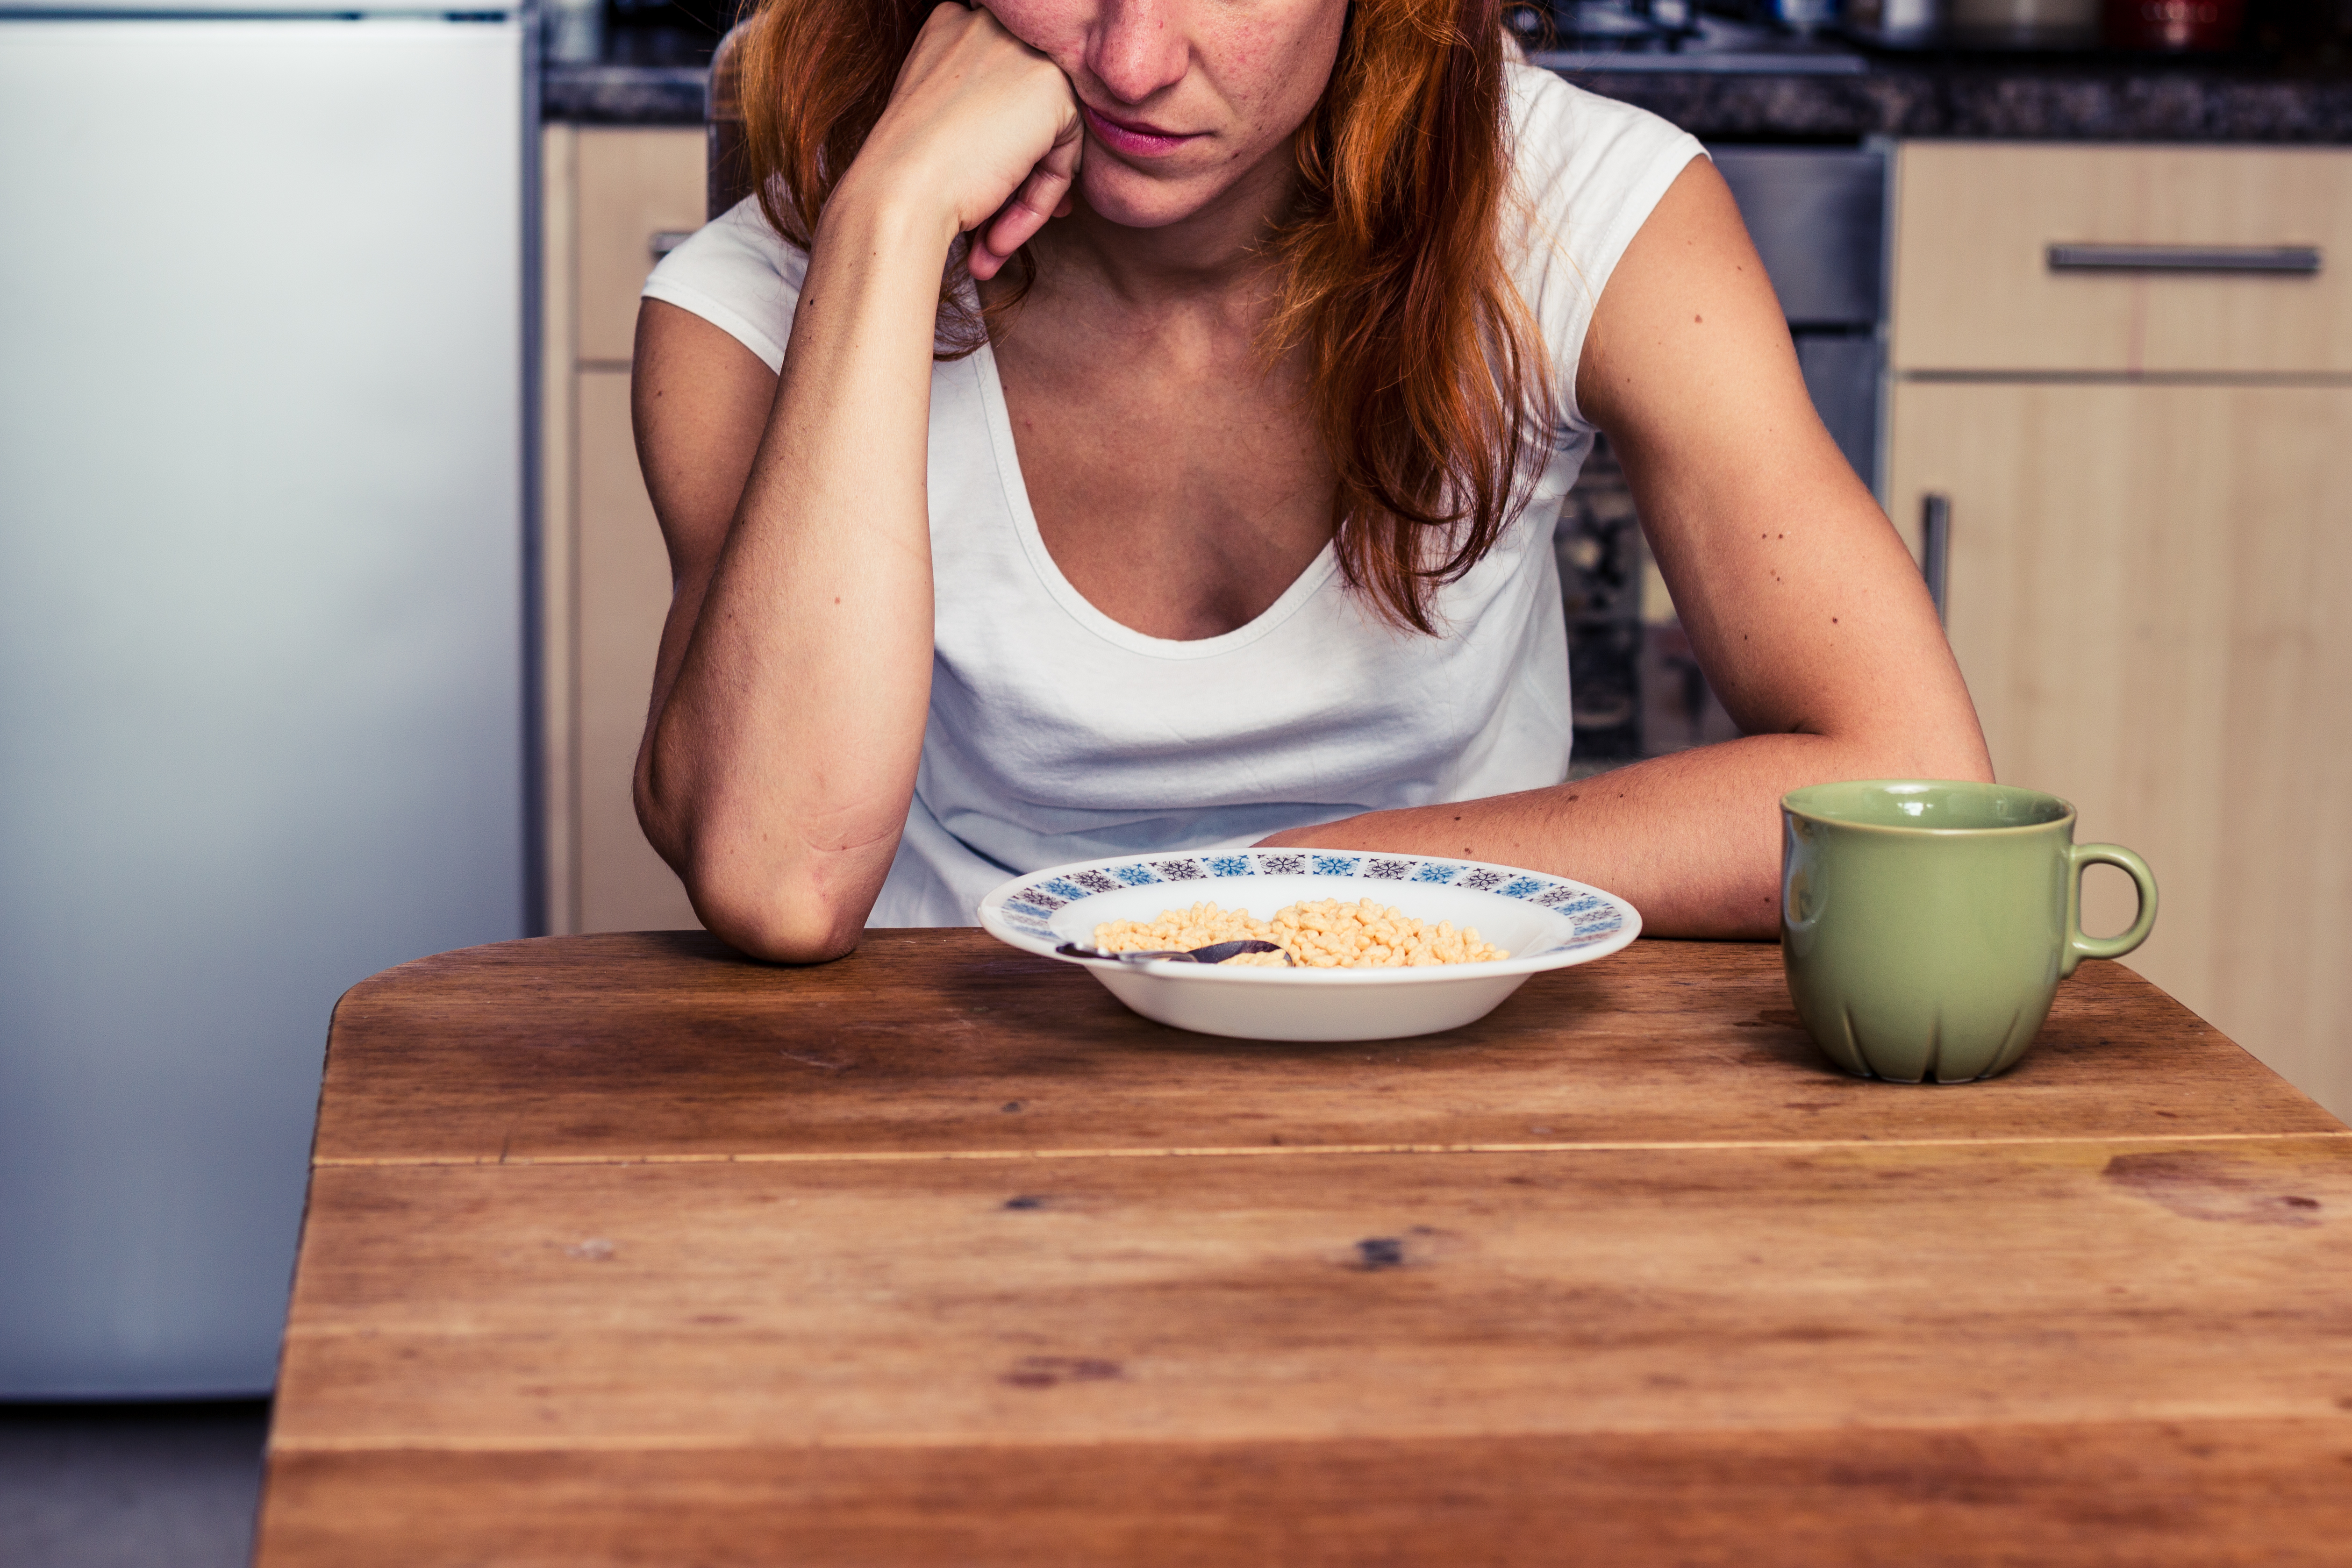 The woman was accused of not wanting to eat her mother-in-law's cooking even though she was sick. | Source: Shutterstock